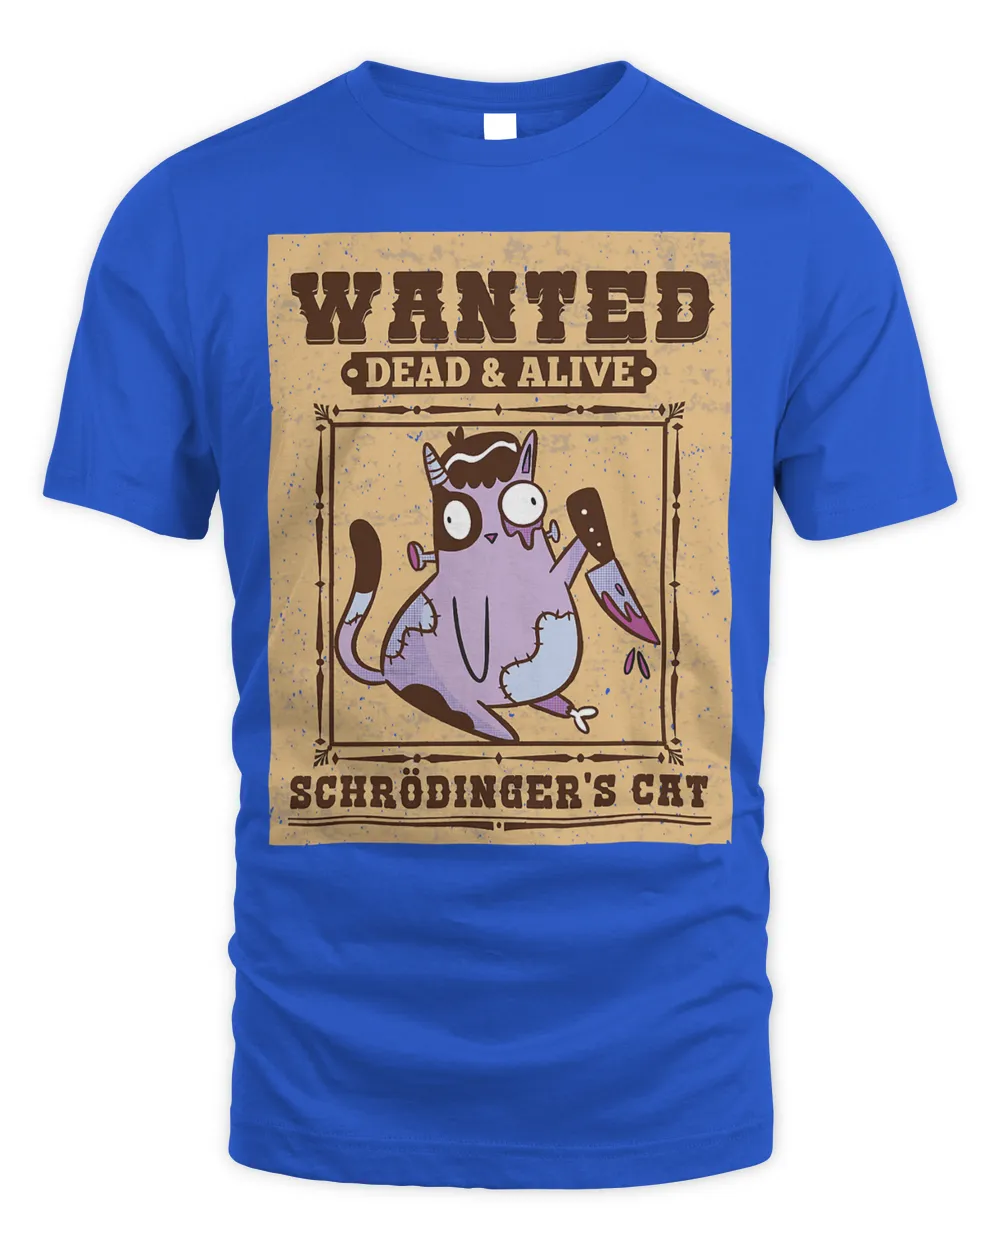 Wanted Dead & Alive Schrödingers Cat with Knife14